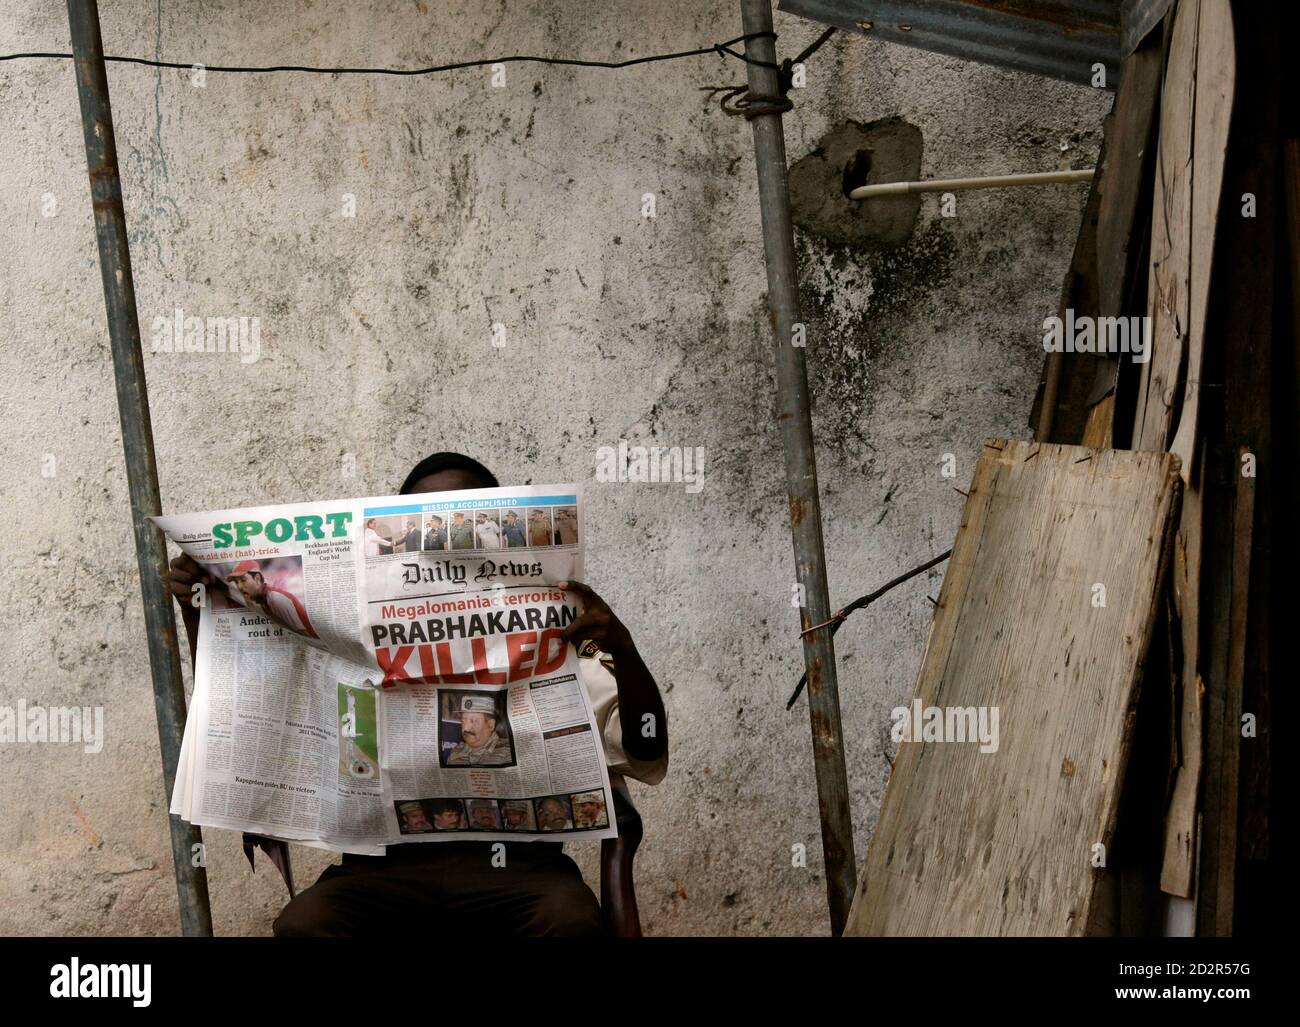 A Sri Lankan man reads a local newspaper reporting that government troops  on Monday killed Liberation Tigers of Tamil Eelam (LTTE) leader Vellupillai  Prabhakaran, in central Colombo May 19, 2009. But today